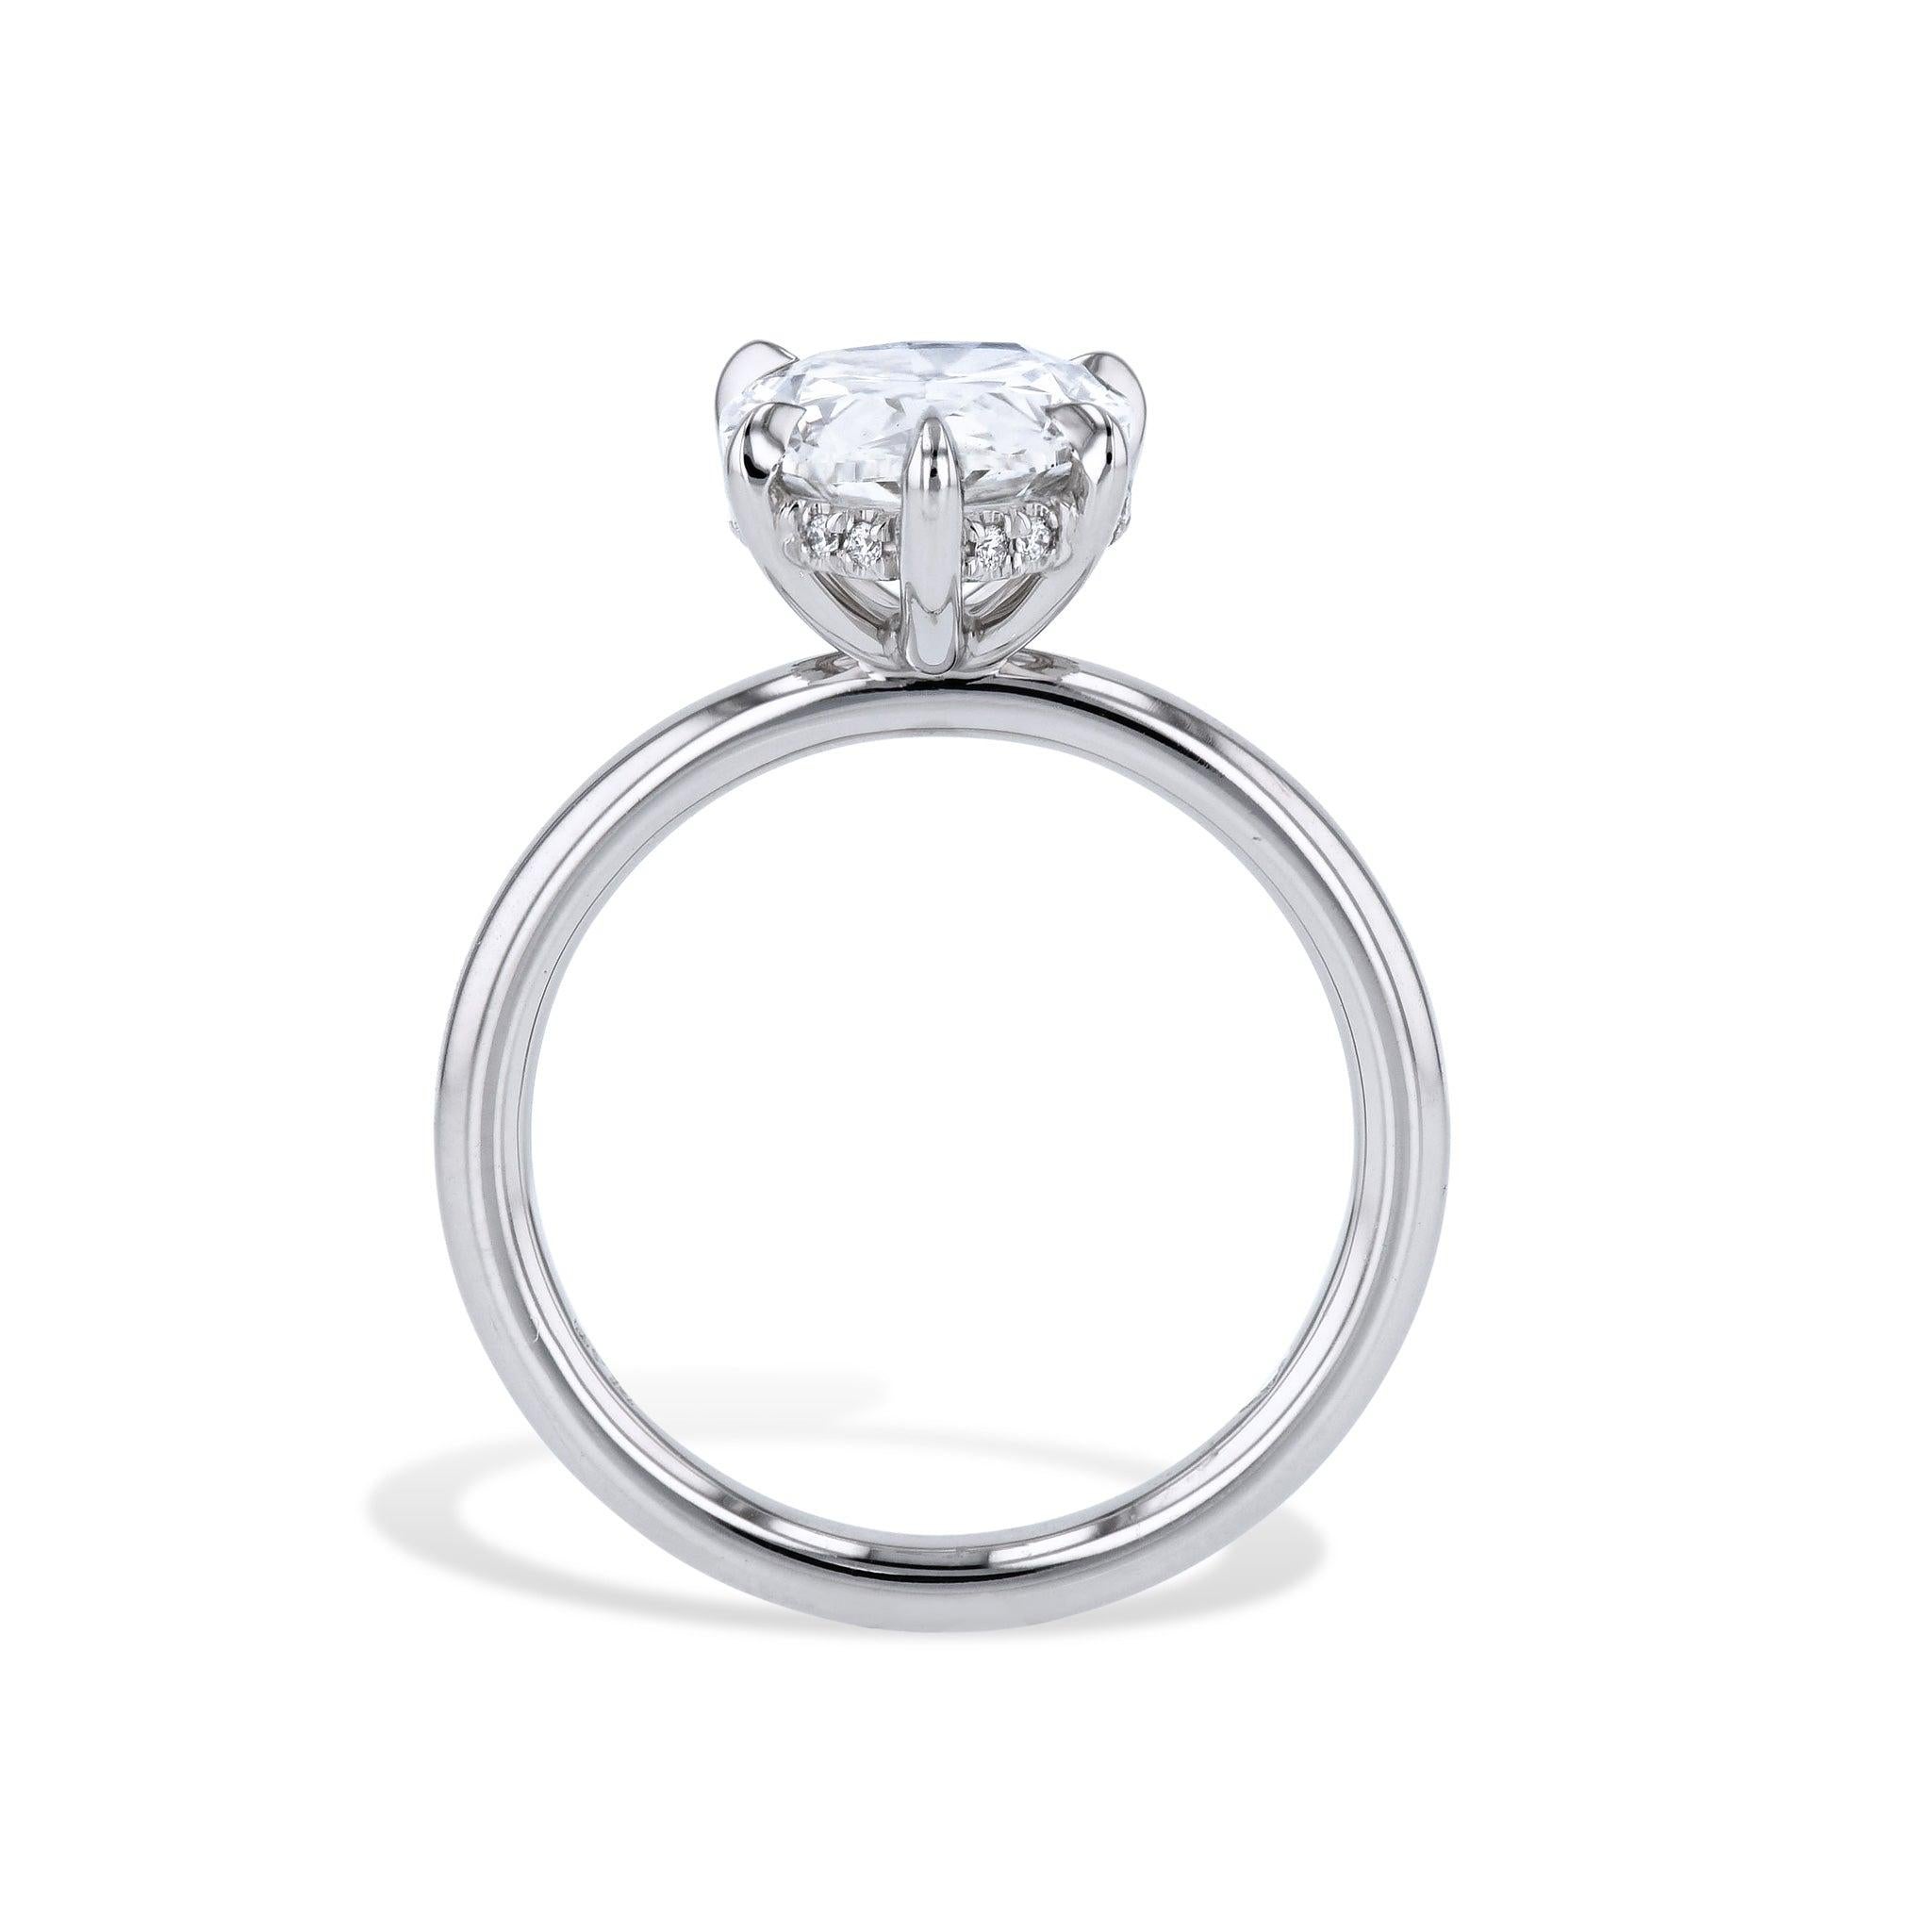 3.13 carat Pear Shape Diamond Platinum Engagement Ring In New Condition For Sale In Miami, FL